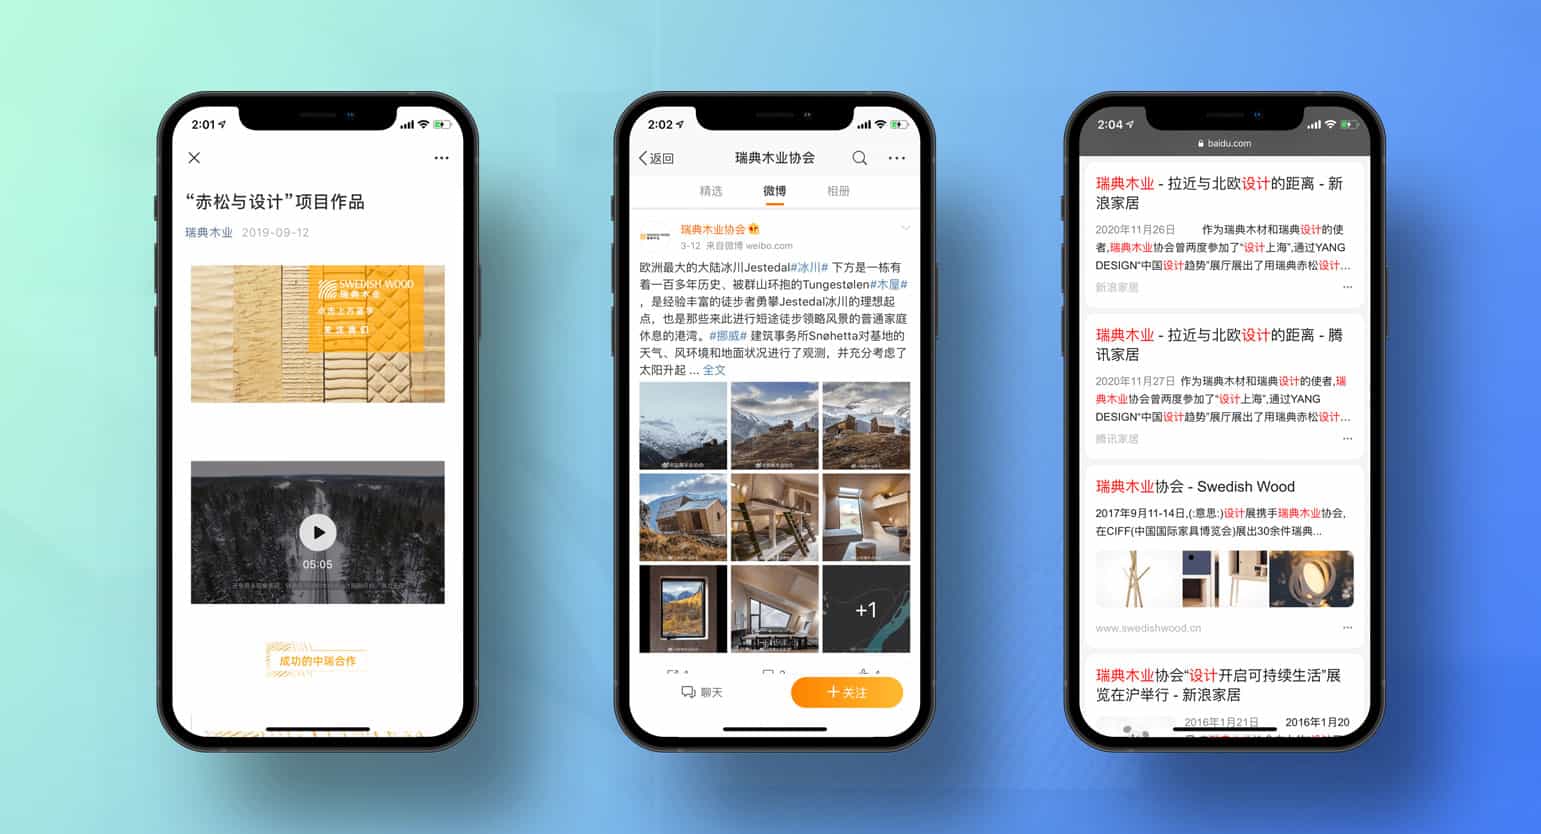 Swedish Woods WeChat and Weibo and Baidu Pages